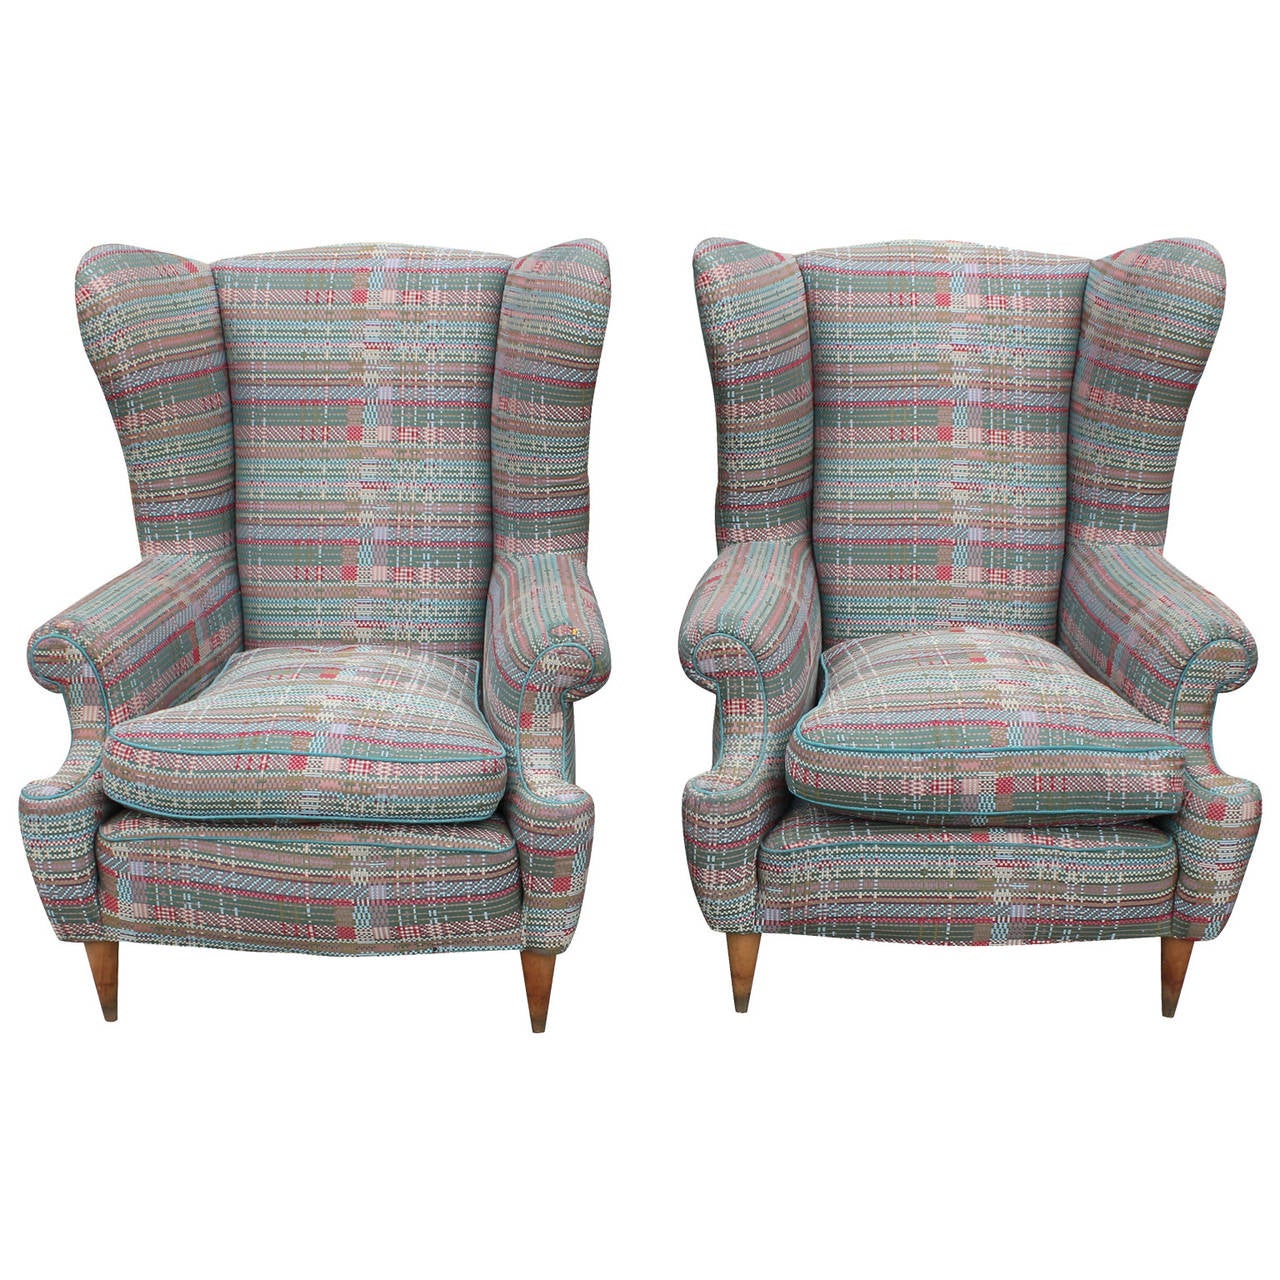 Great pair of oversized Italian wingback lounge chairs. Chairs have lovely curved lines and delicate tapered legs. Chairs are currently upholstered in a colorful tweed which is worn in some areas-could use new upholstery.